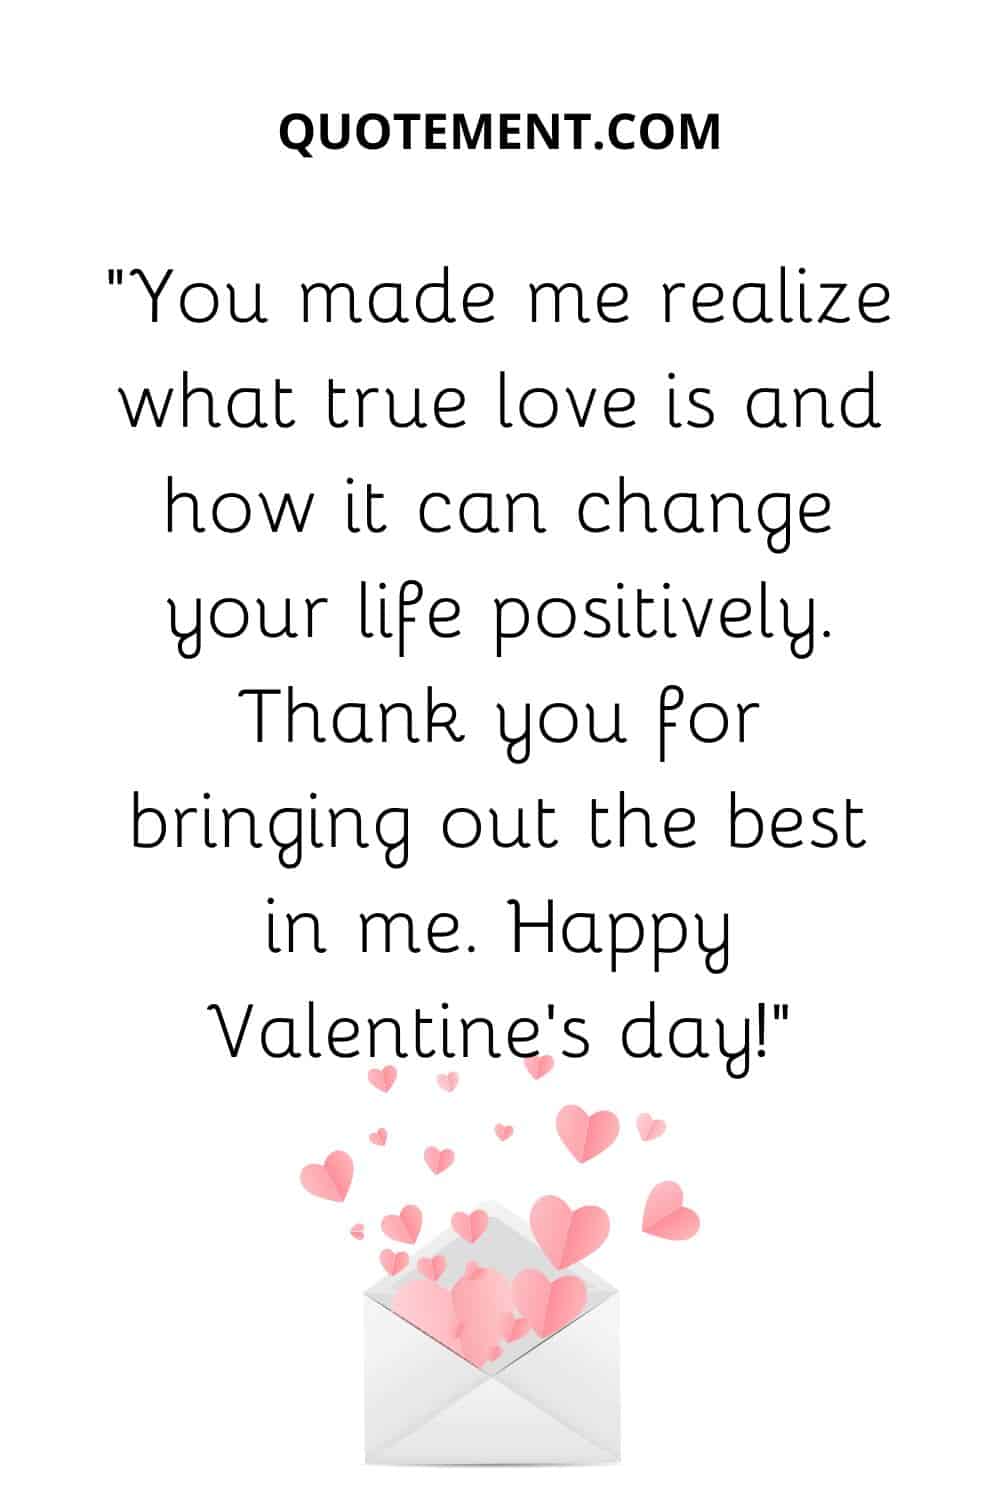 “You made me realize what true love is and how it can change your life positively. Thank you for bringing out the best in me. Happy Valentine’s day!”